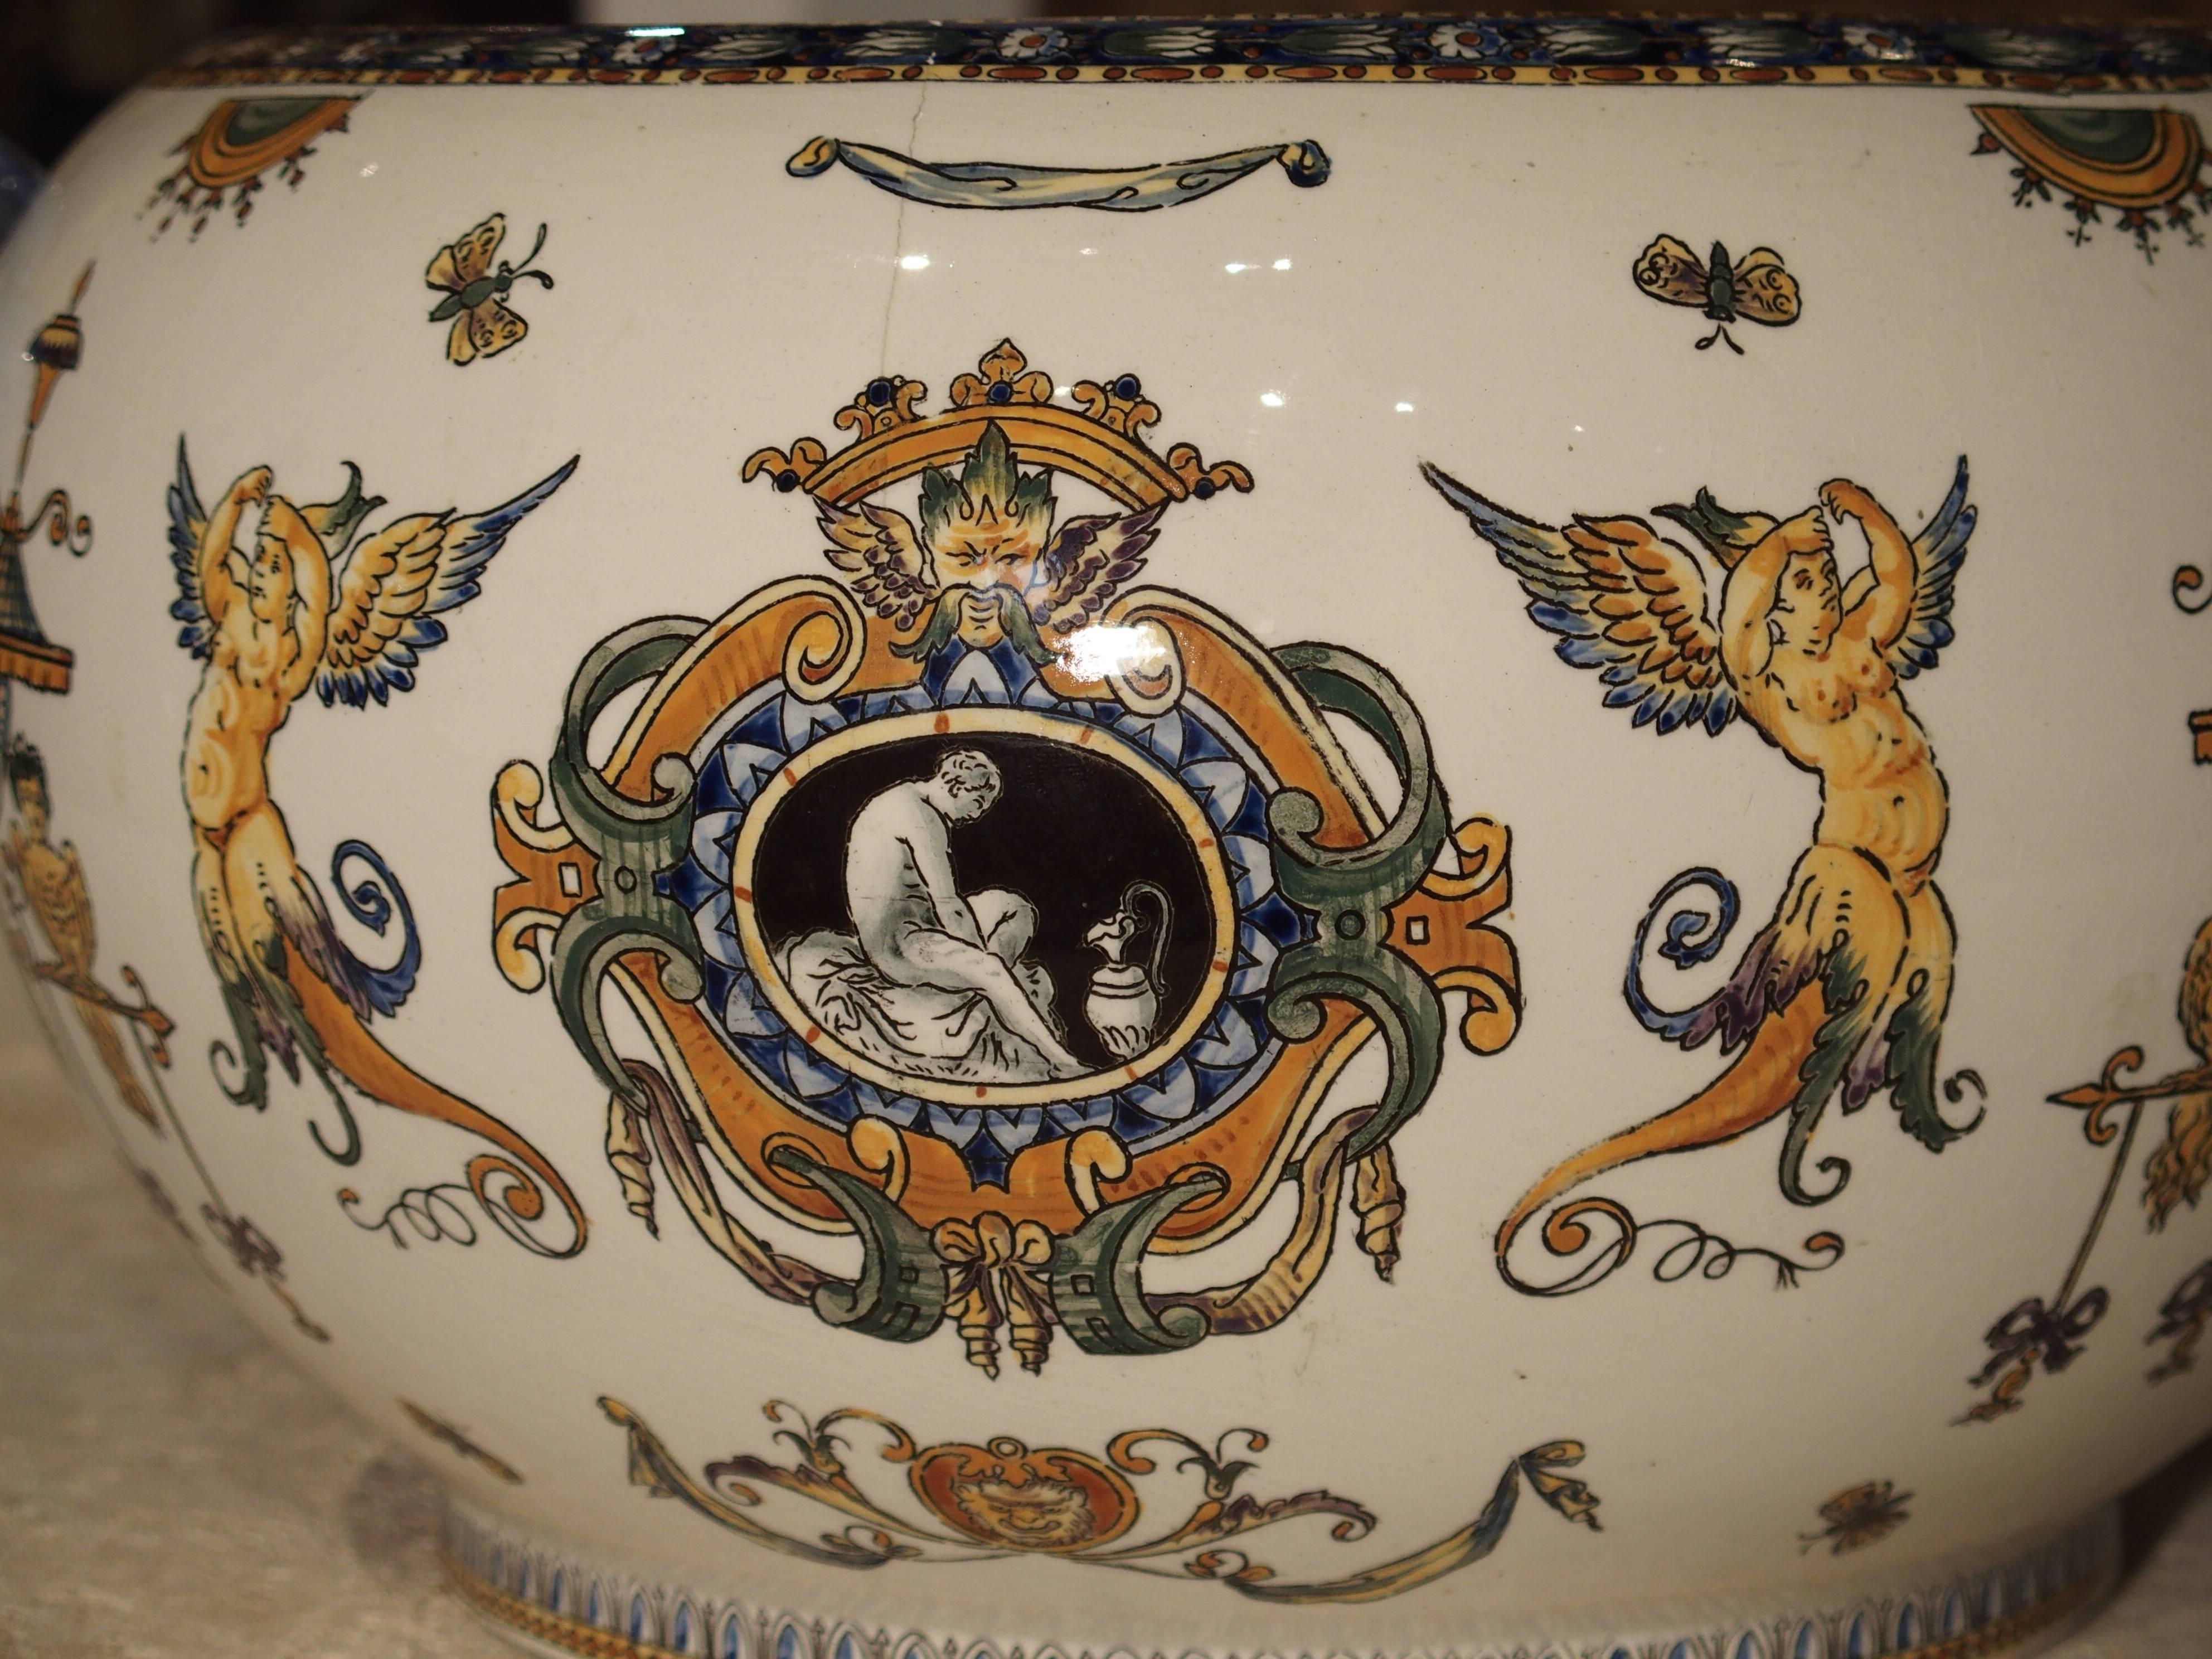 Renaissance Antique Gien Cachepot with Dolphin Handles from France, circa 1900